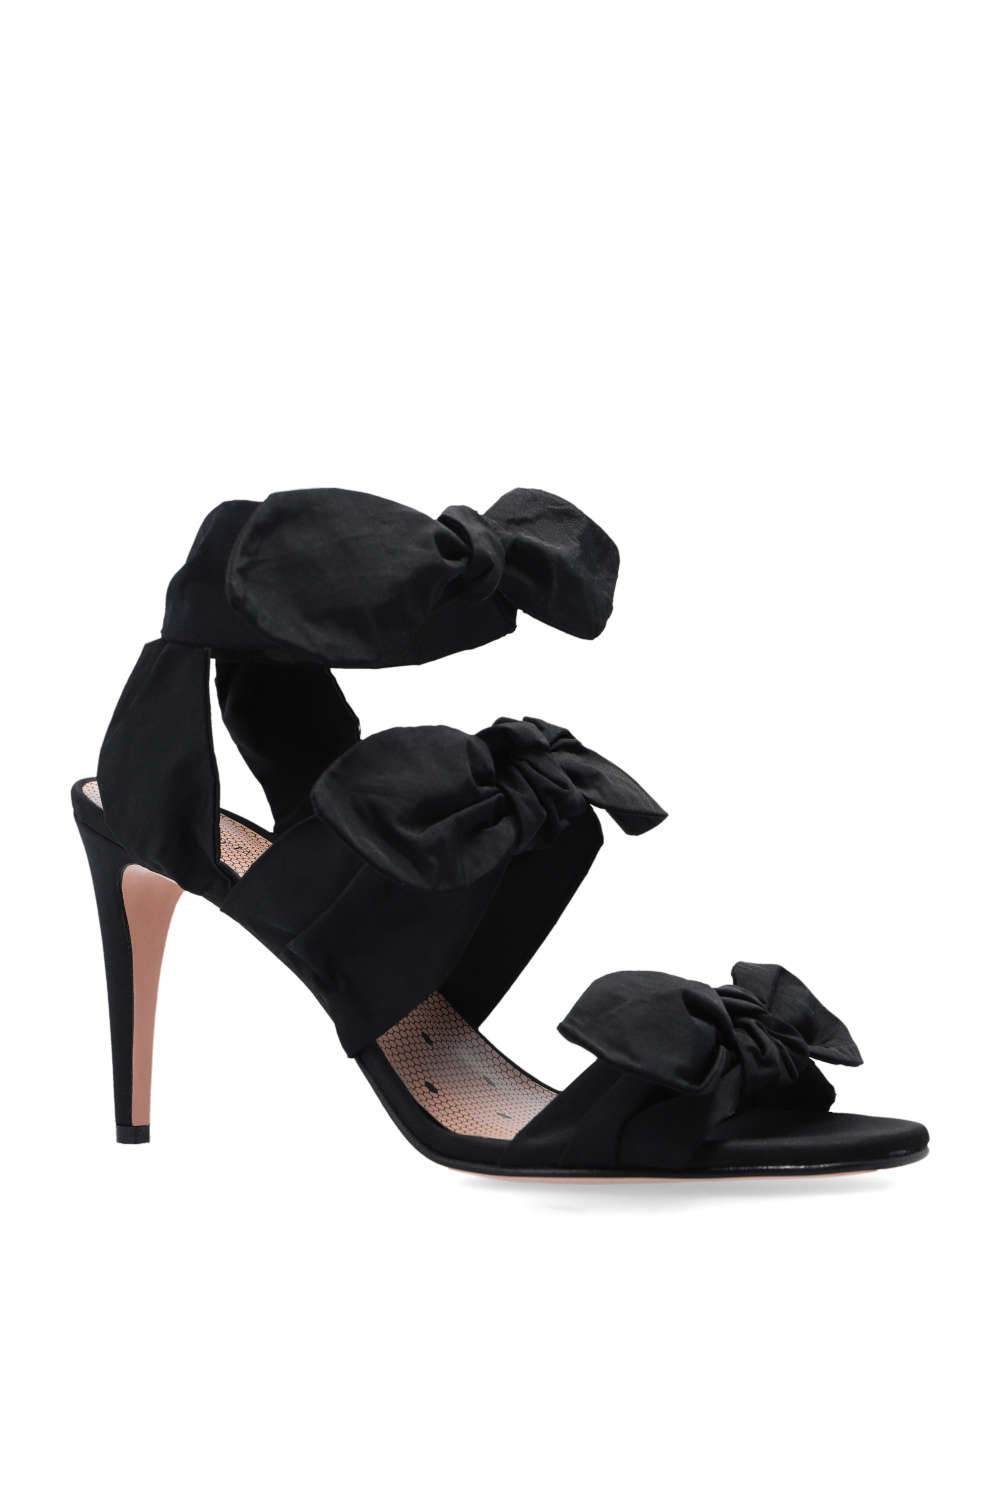 Red Valentino ‘Knot Me Up’ heeled sandals